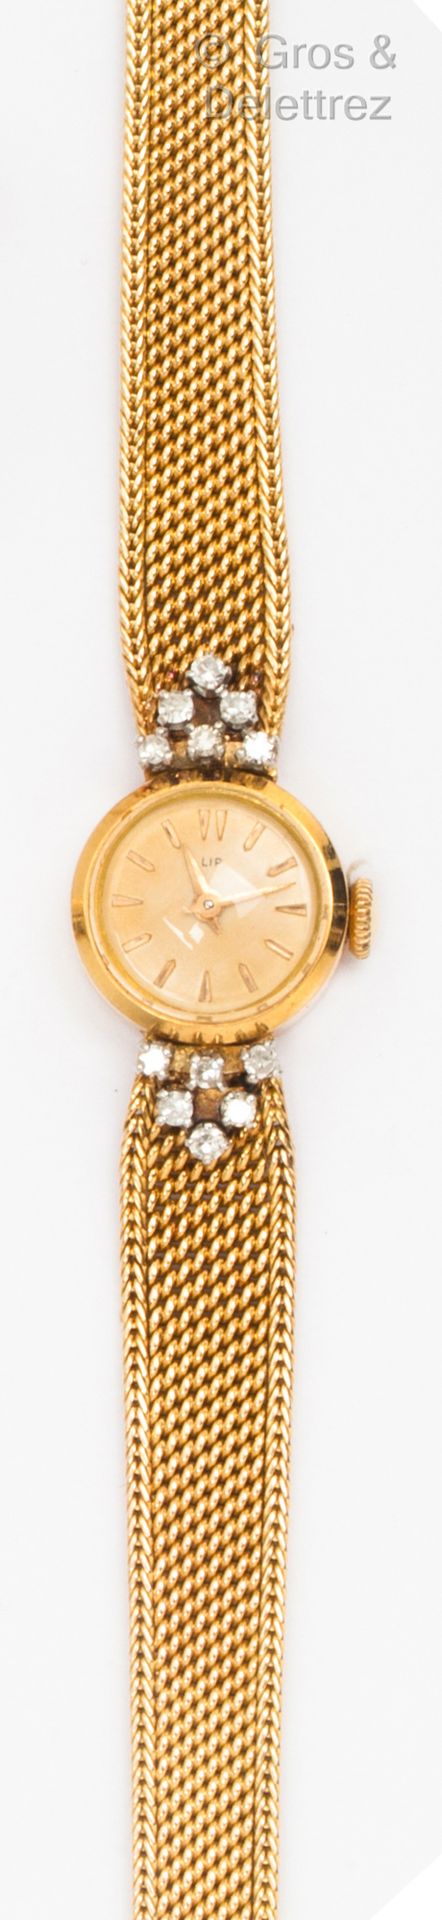 LIP Yellow gold ladies' watch, round case, gold dial with applied baton hour mar&hellip;